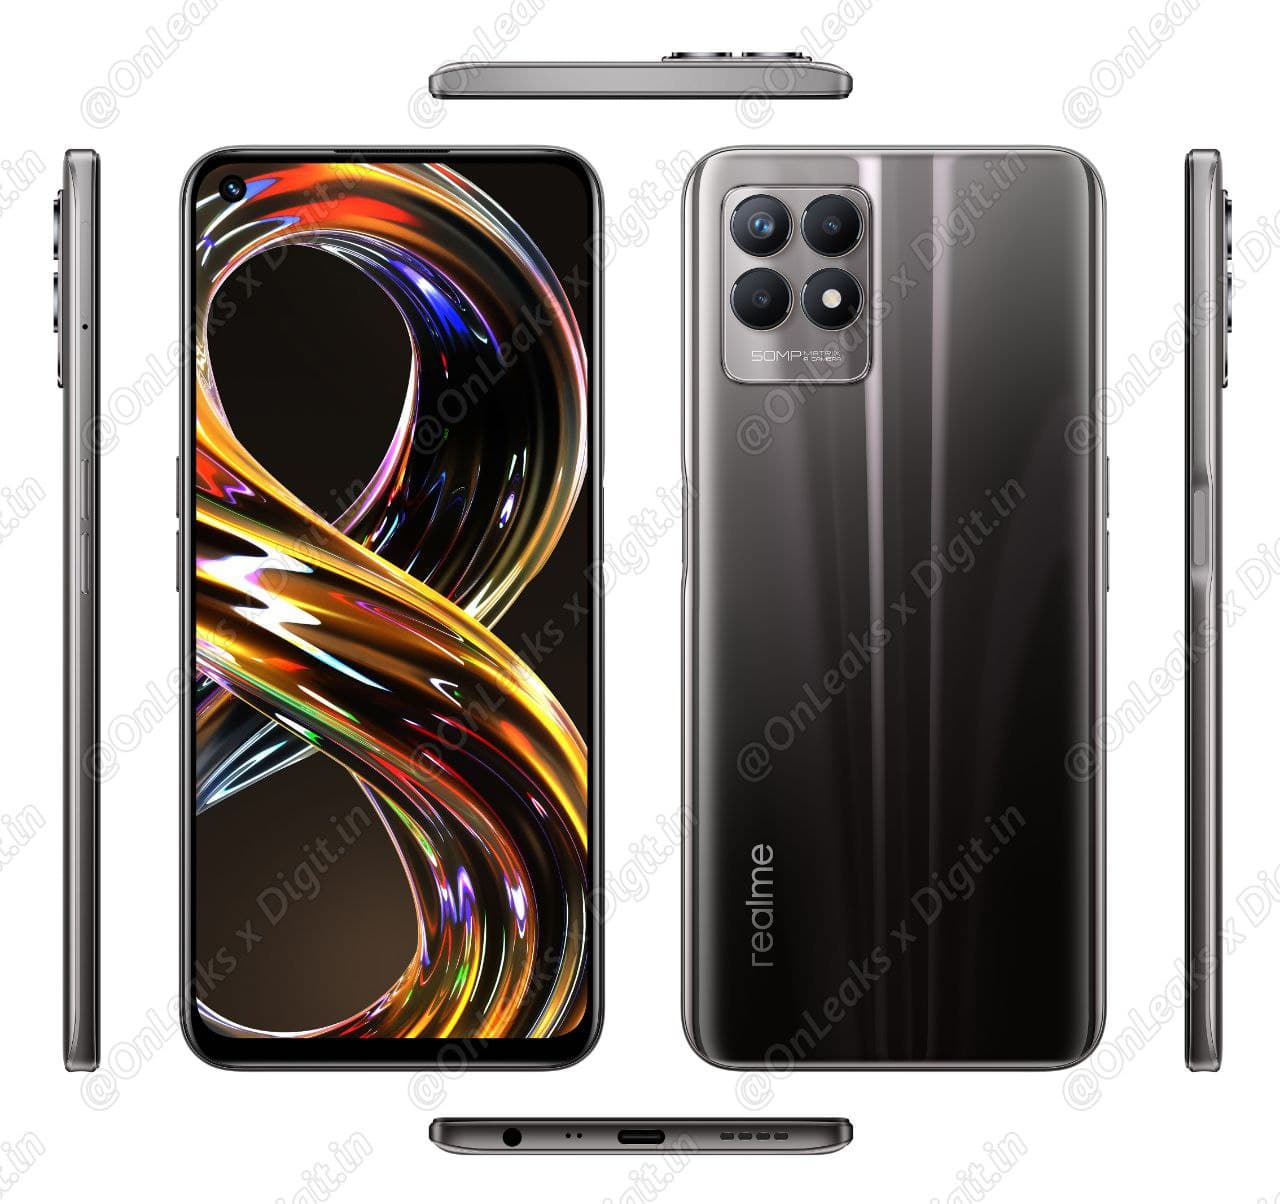 Realme Soon launch two additions to their 8 series - Realme 8i & Realme 8s.